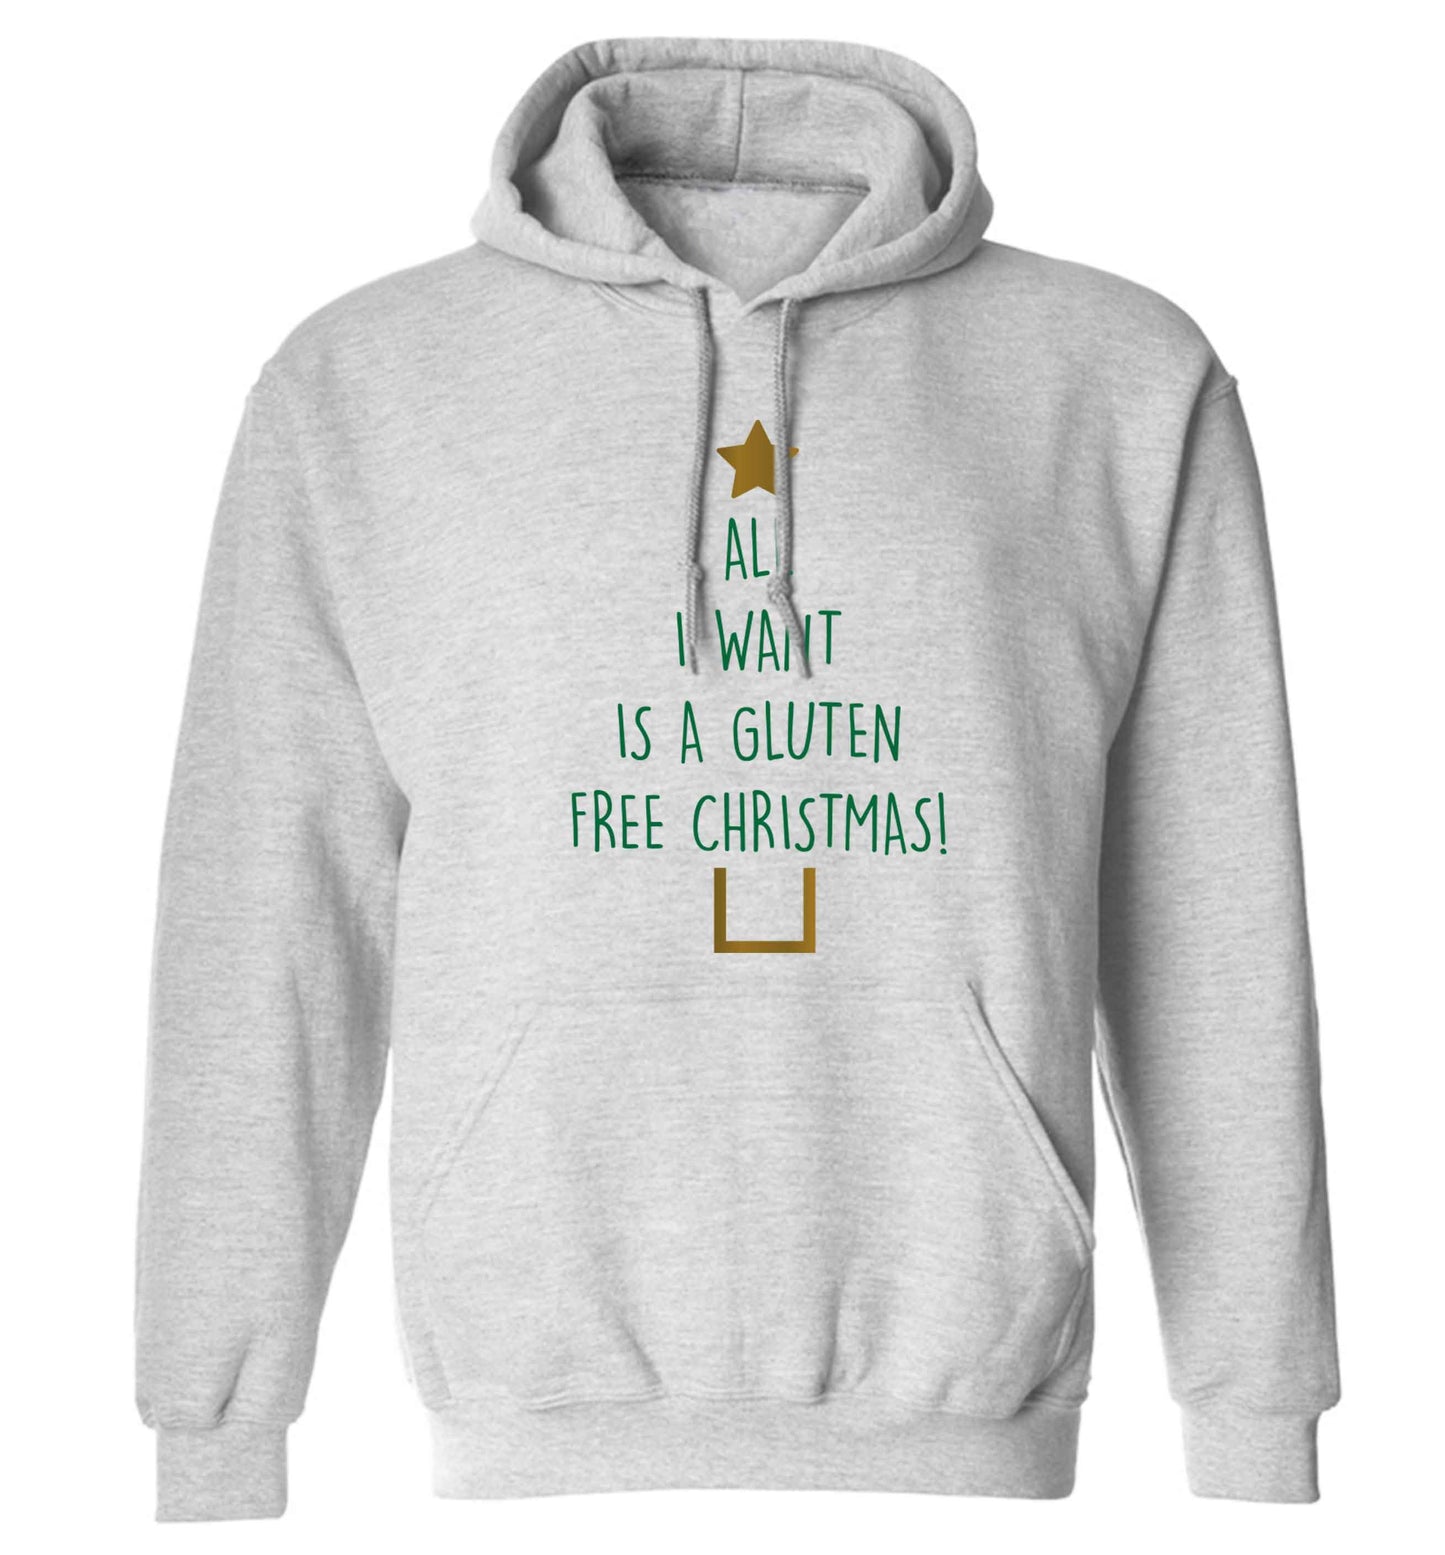 All I want is a gluten free Christmas adults unisex grey hoodie 2XL